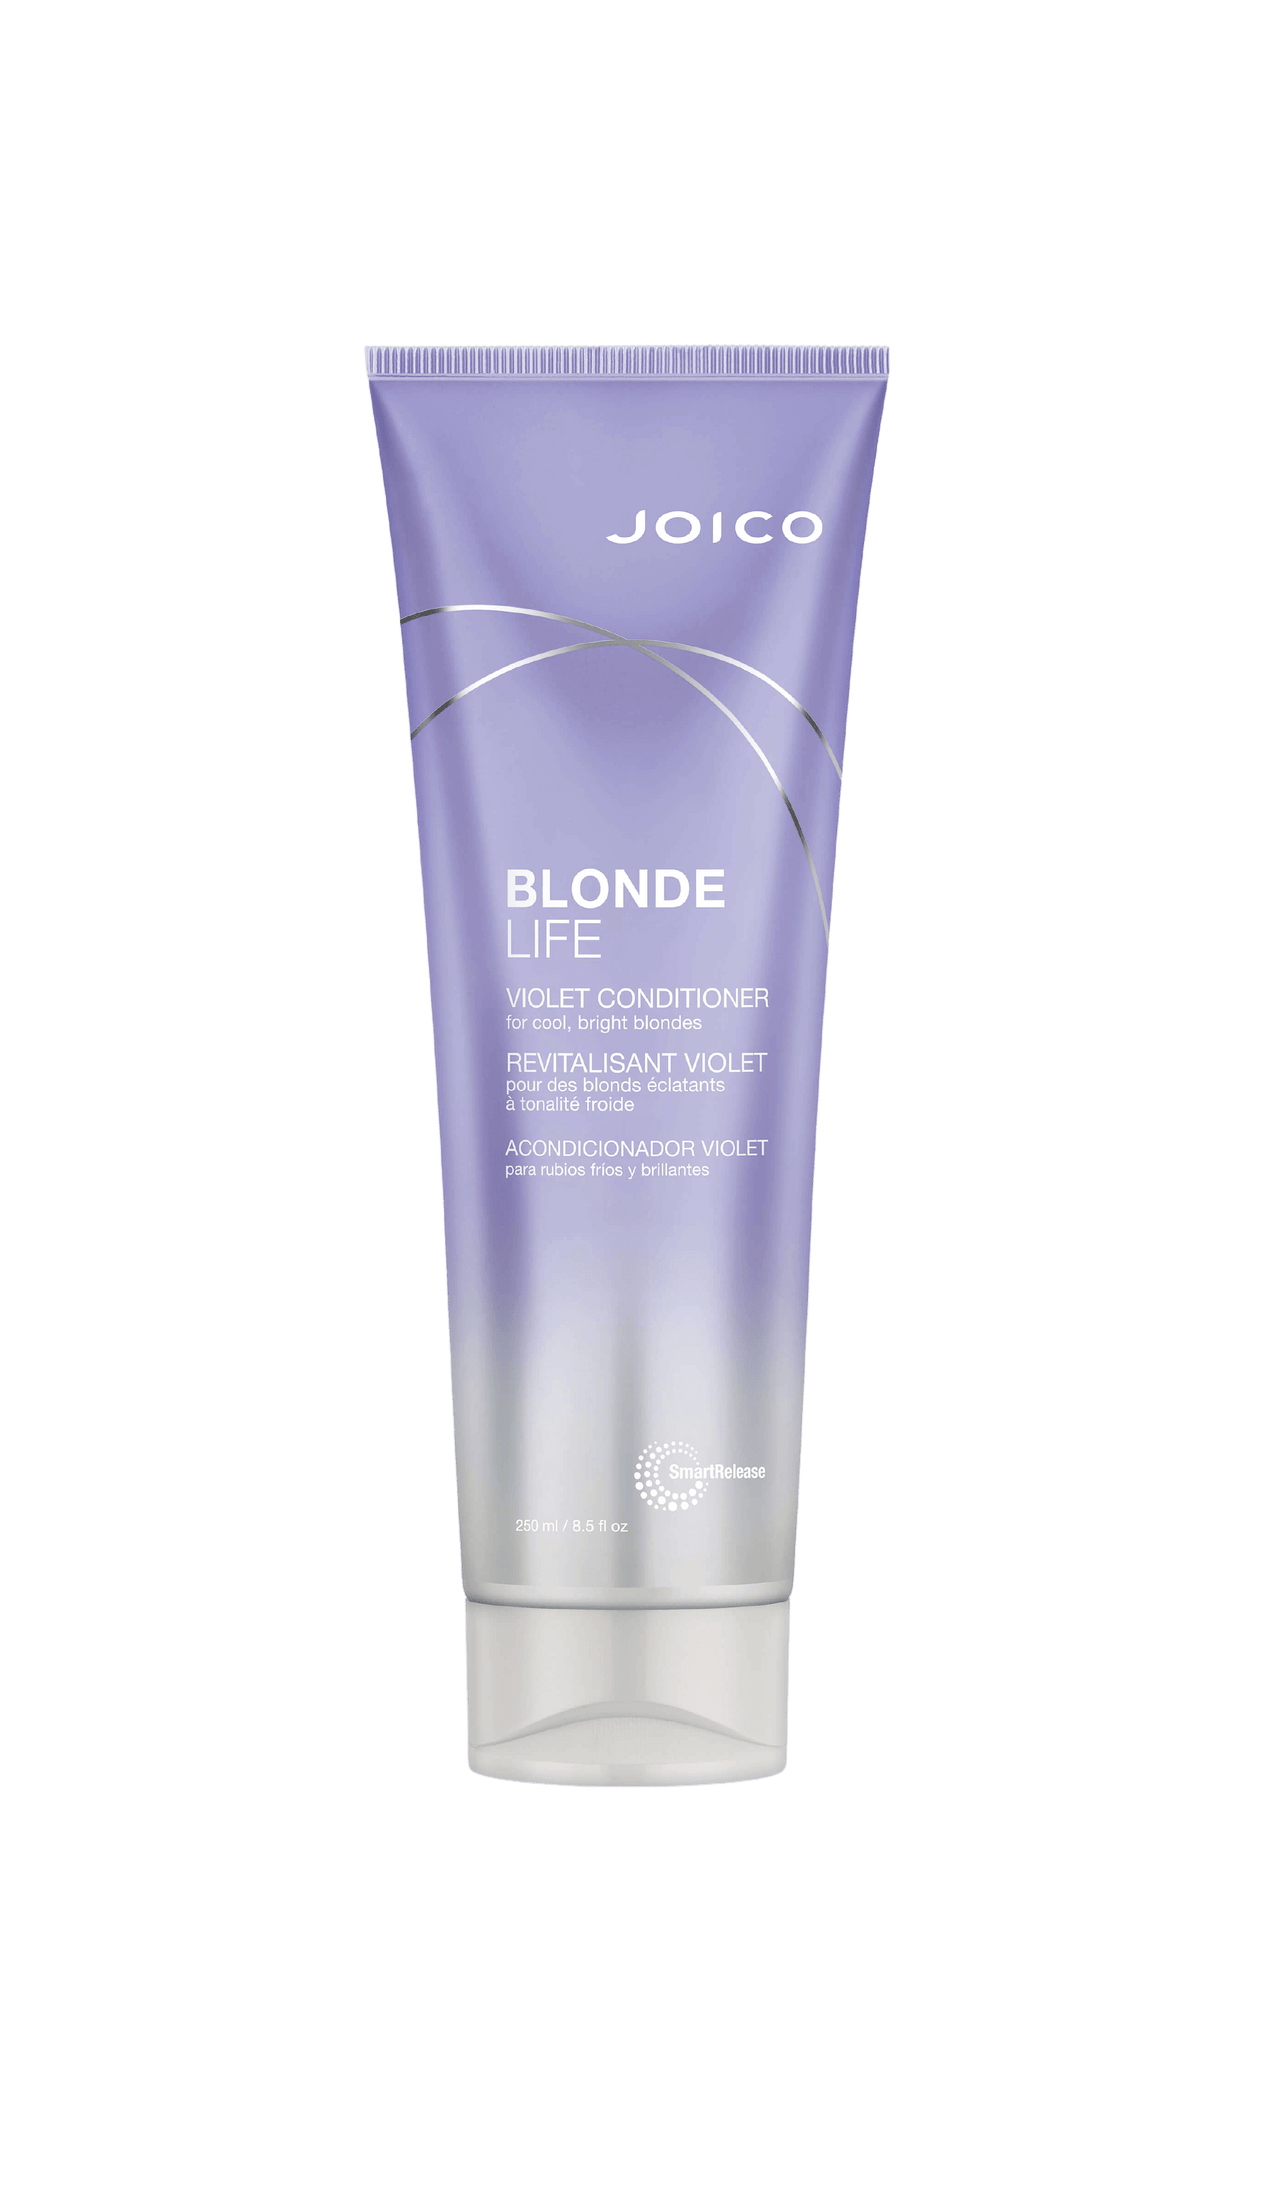 Joico Blonde Life Violet Conditioner 250mL Tube